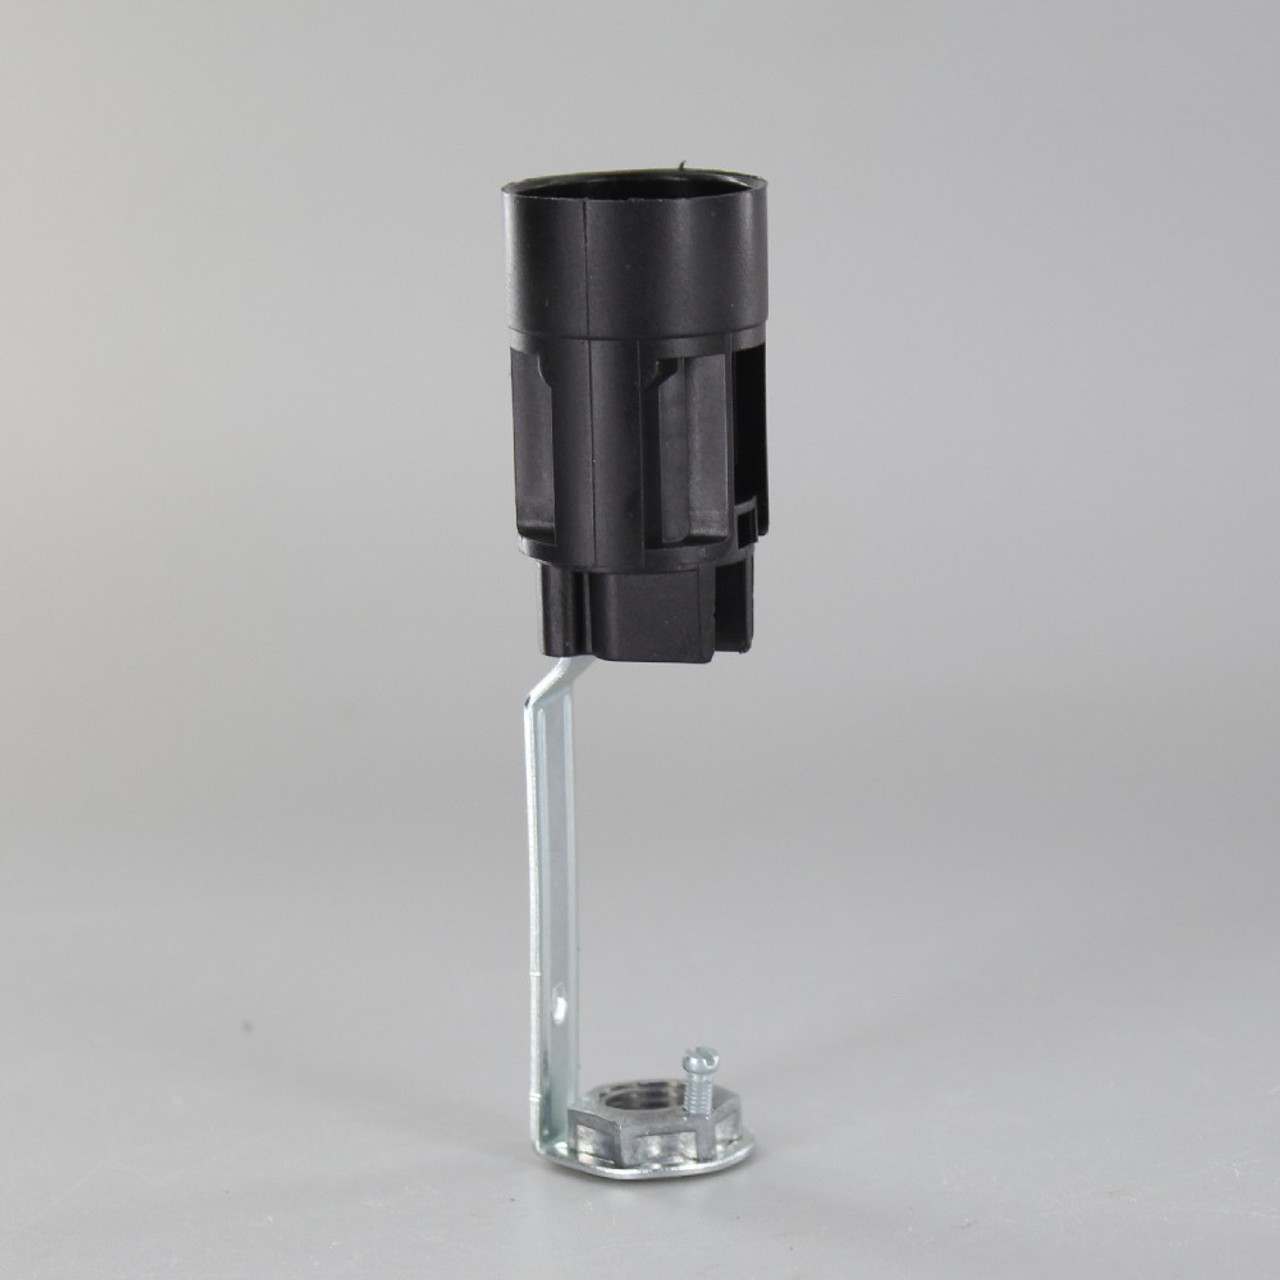 Trein Teken een foto gezagvoerder 85mm Height - E14 Thermoplastic Candle Lamp Holder with 1/8ips Threaded  Hickey